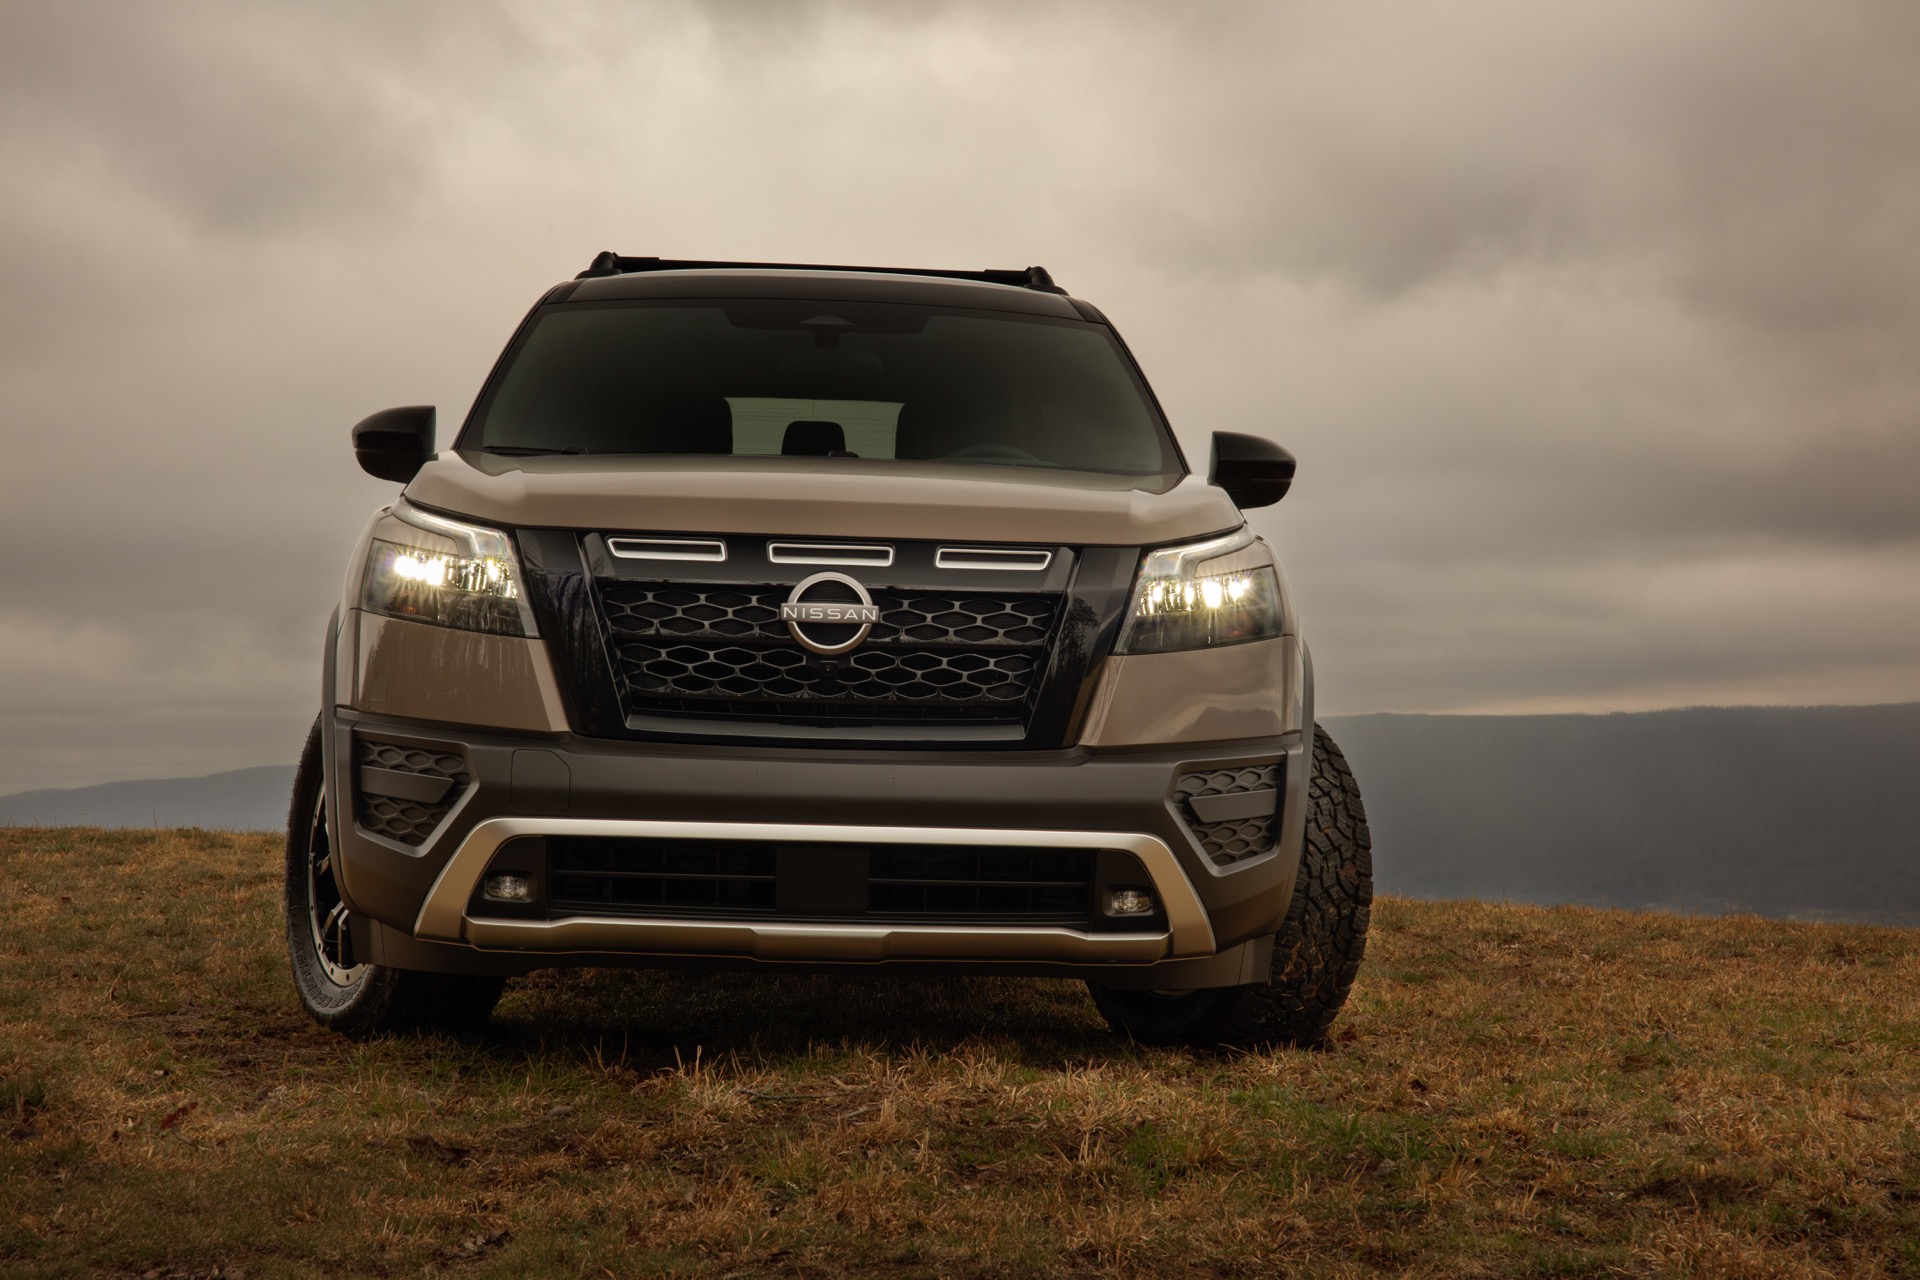 2020 Nissan Pathfinder: The Midsize Crossover SUV With Muscle